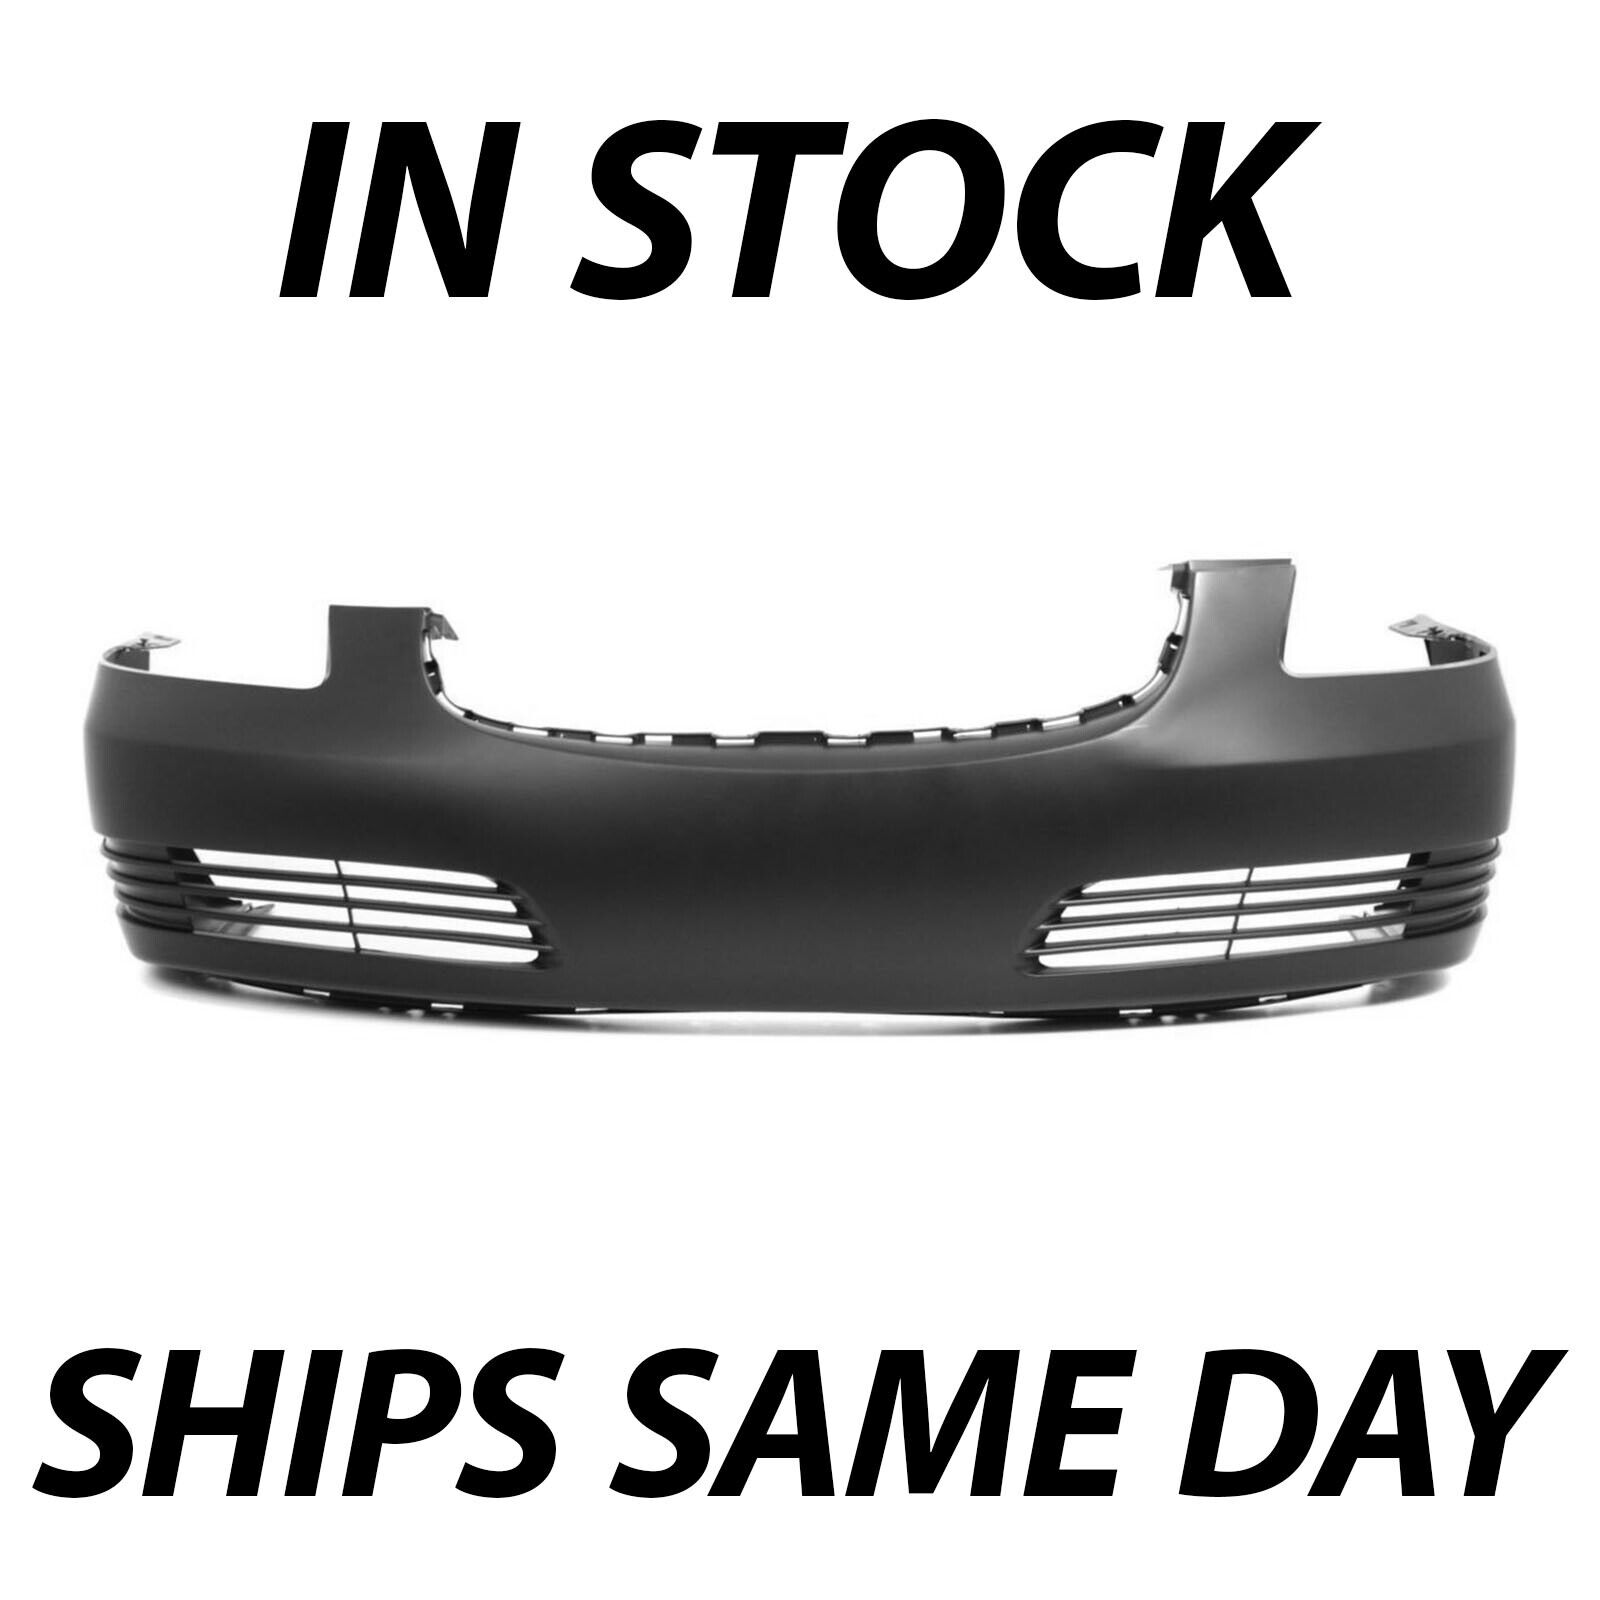 NEW Primered Front Bumper Cover Fascia for 2006-2011 Buick Lucerne CX CXL 06-11